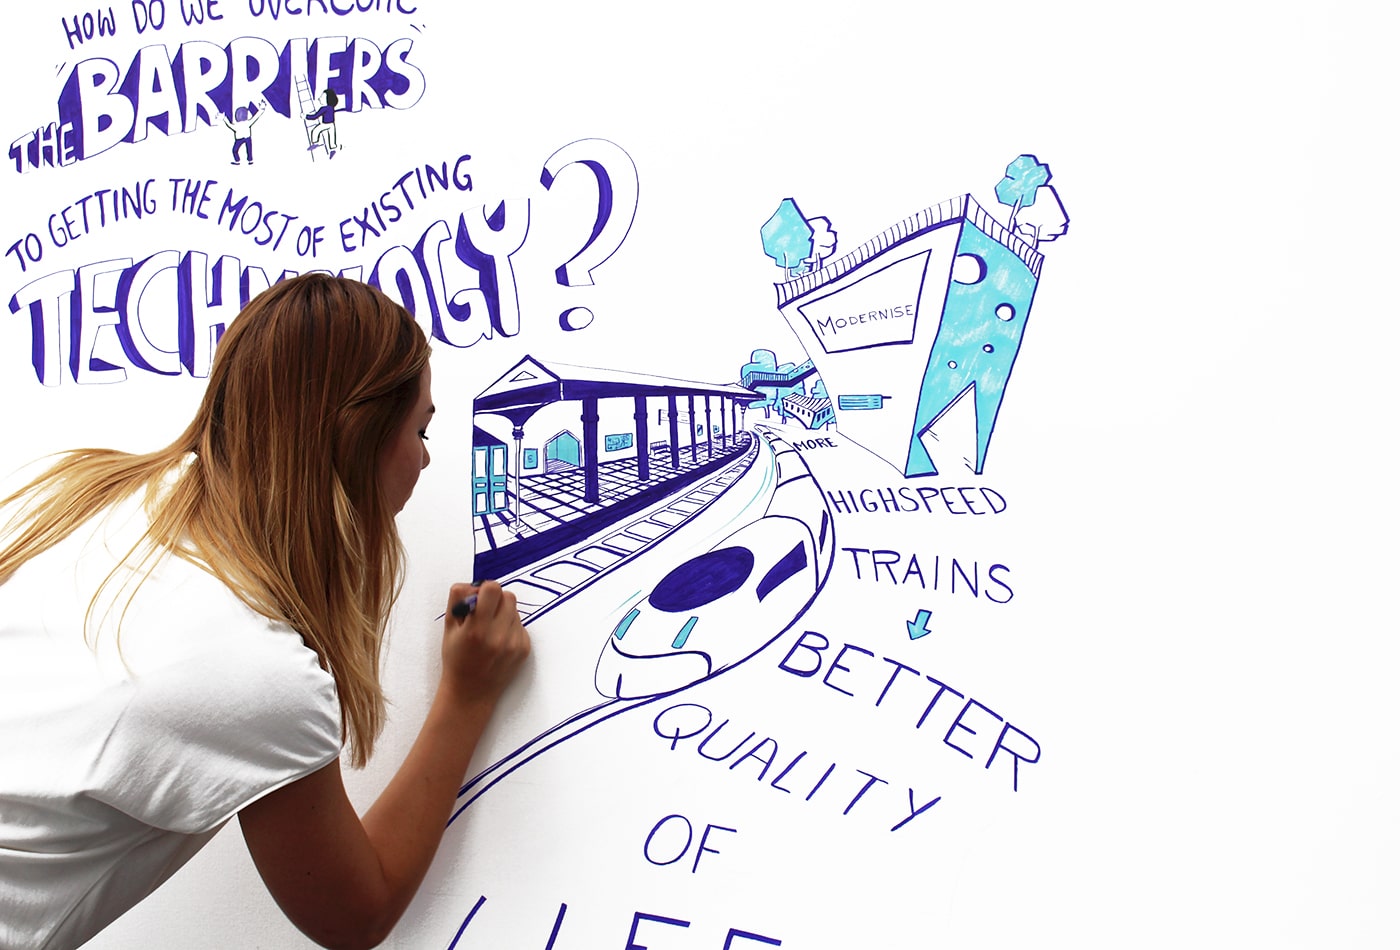 Graphic Recording at business events